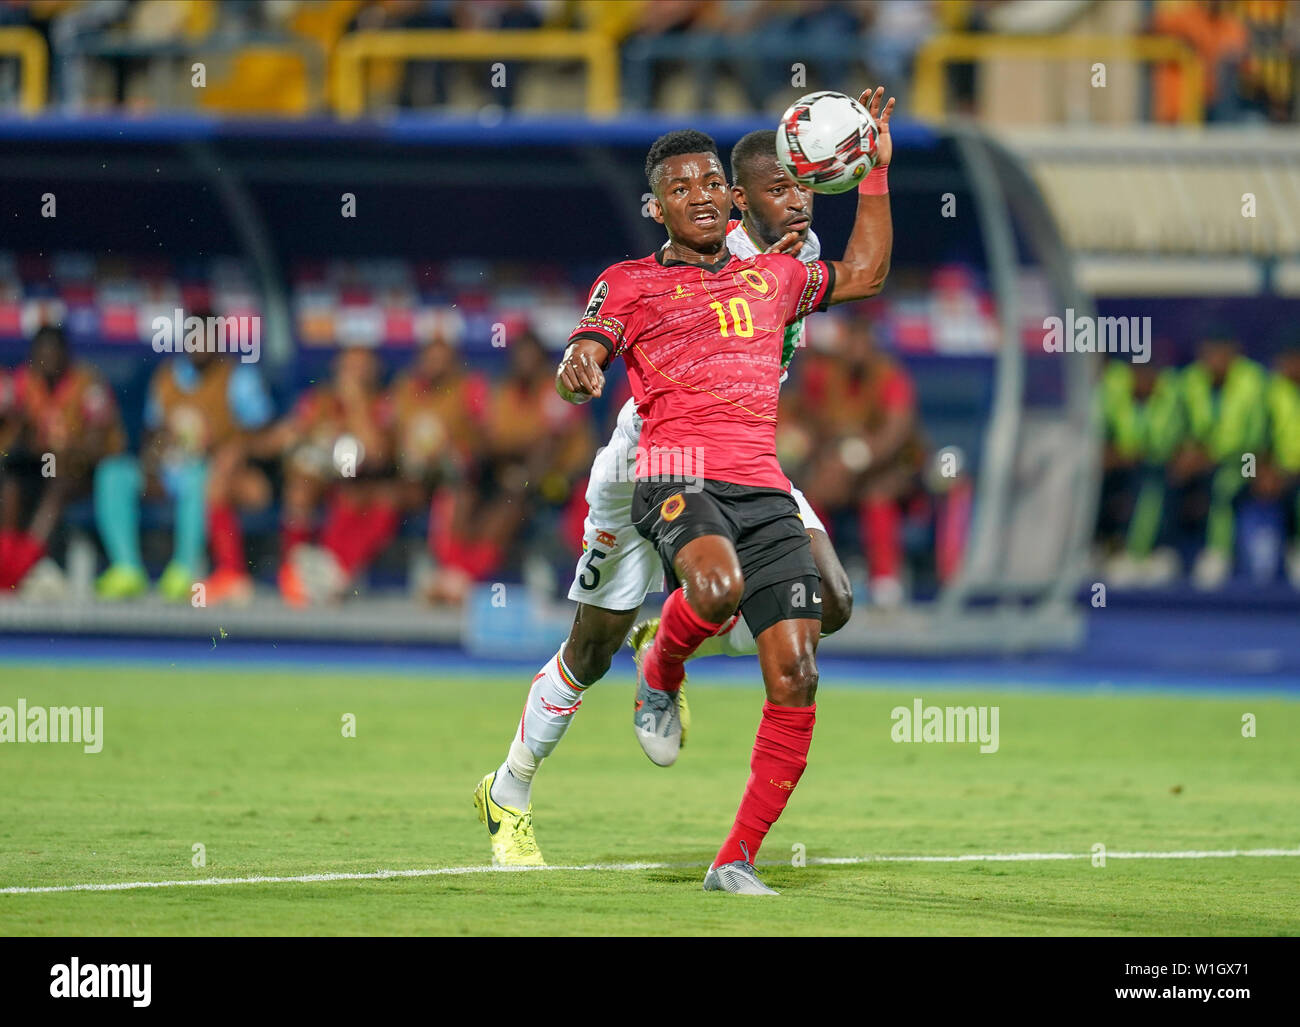 Ismailia, Egypt. 2nd July, 2019. Jacinto Muondo Dala of Angola and Boubacar Kiki Kouyate of Mali challenging for the ball during the 2019 African Cup of Nations match between Angola and Mali at the Ismailia Stadium in Ismailia, Egypt. Ulrik Pedersen/CSM/Alamy Live News Stock Photo